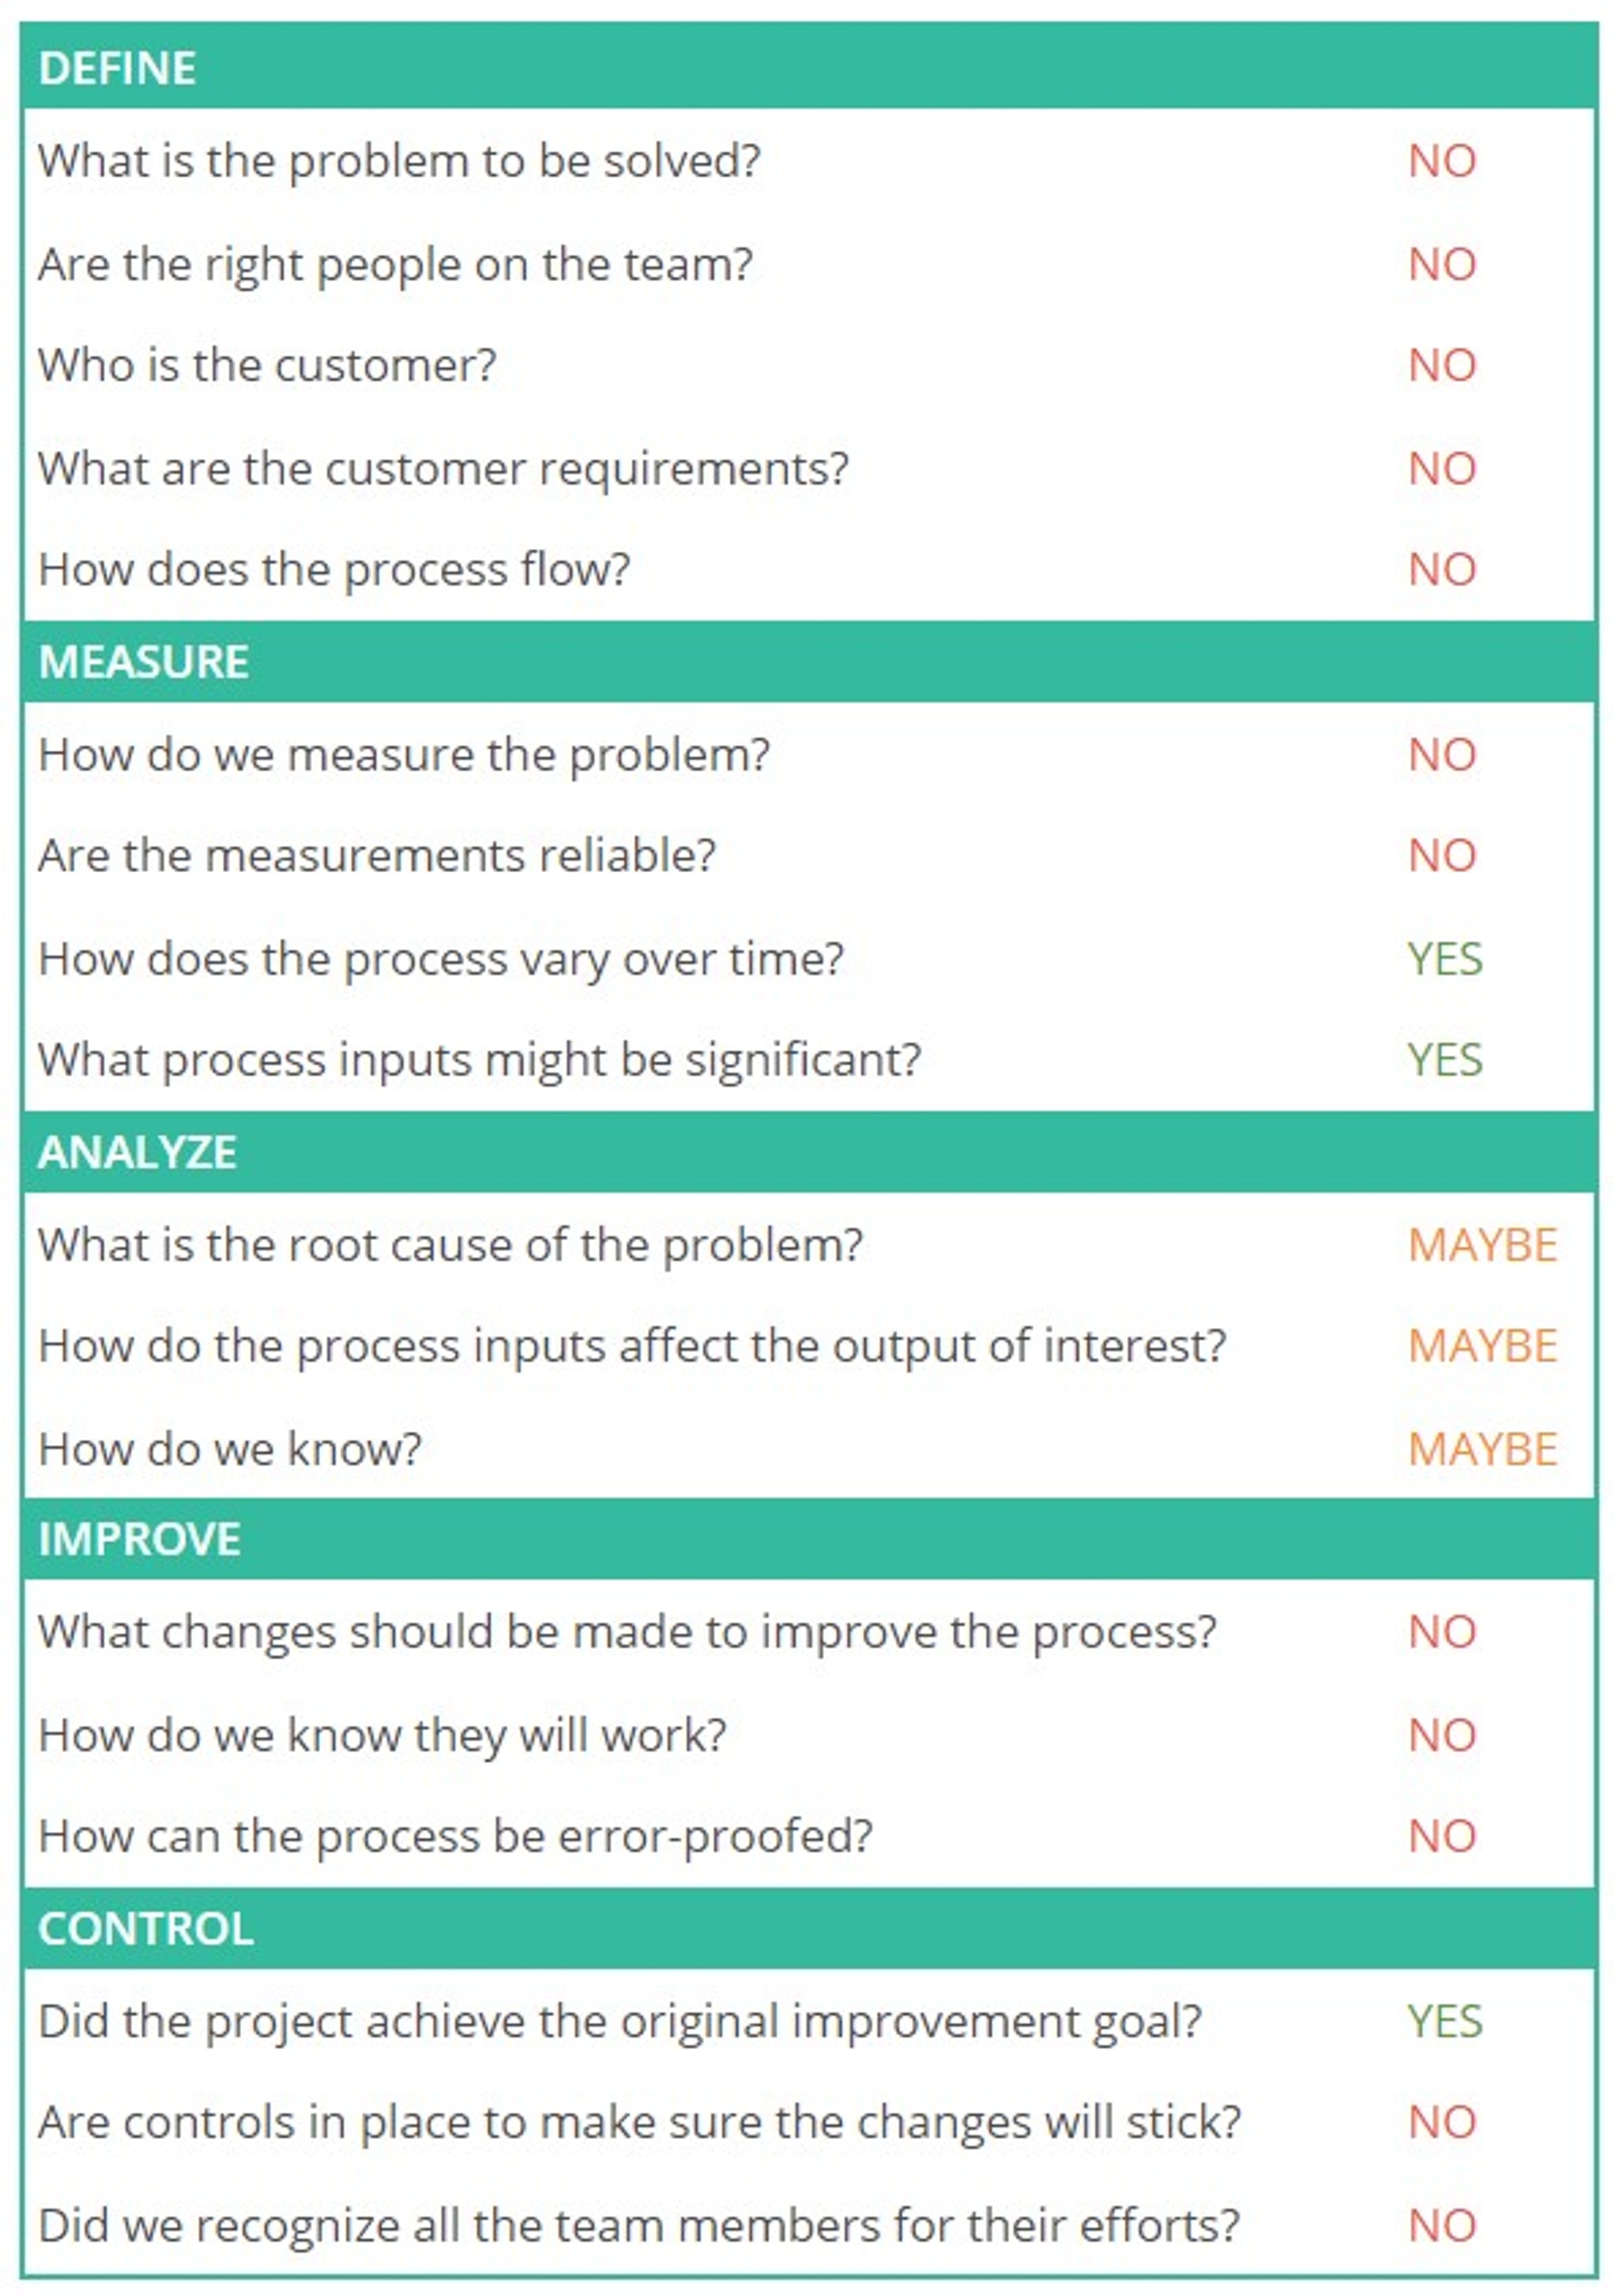 Table showing a breakdown of questions across DMAIC phases